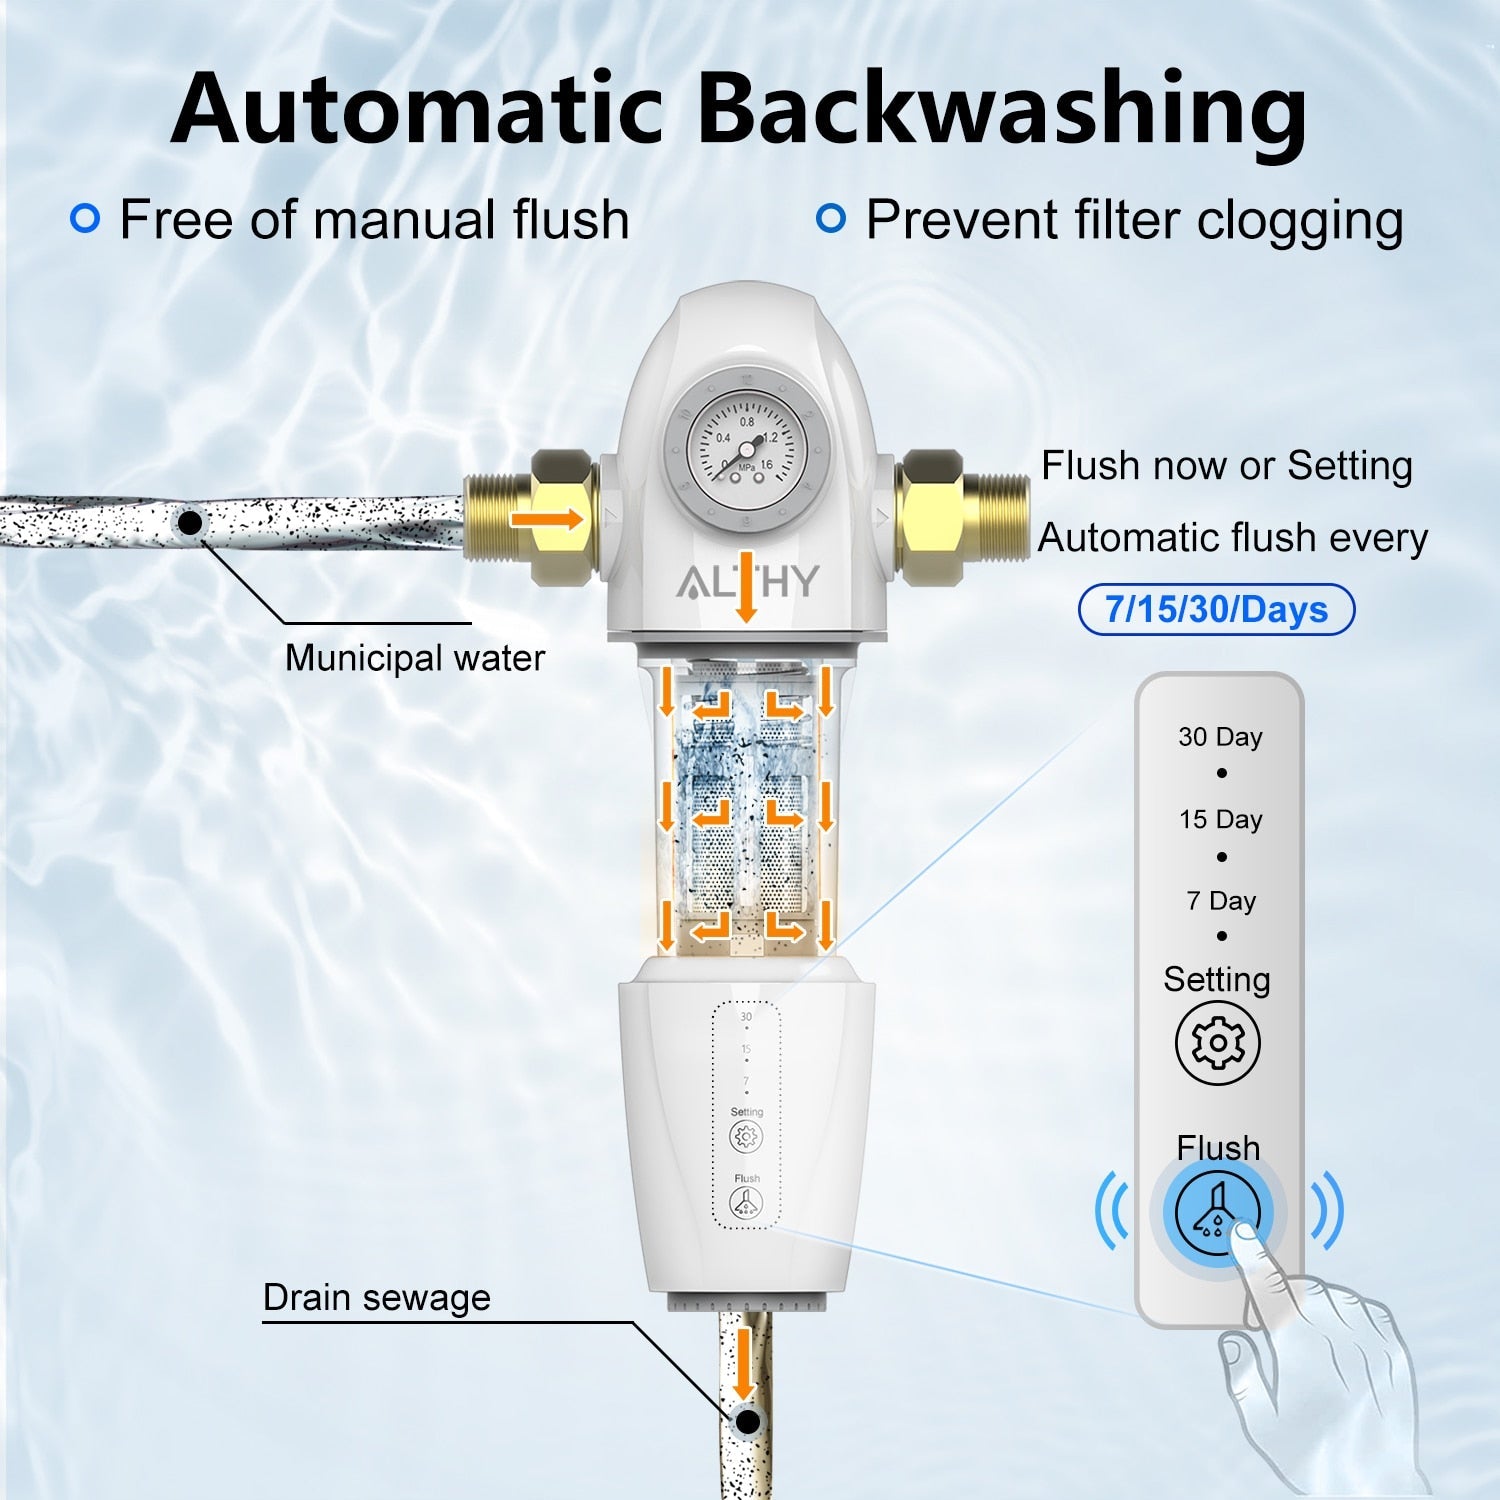 ALTHY PRE-AUTO2 Automatic Flushing Backwash Prefilter Spin Down Sediment Water Filter Central Whole House Purifier System  Hardware > Plumbing > Water Dispensing & Filtration 338.99 EZYSELLA SHOP